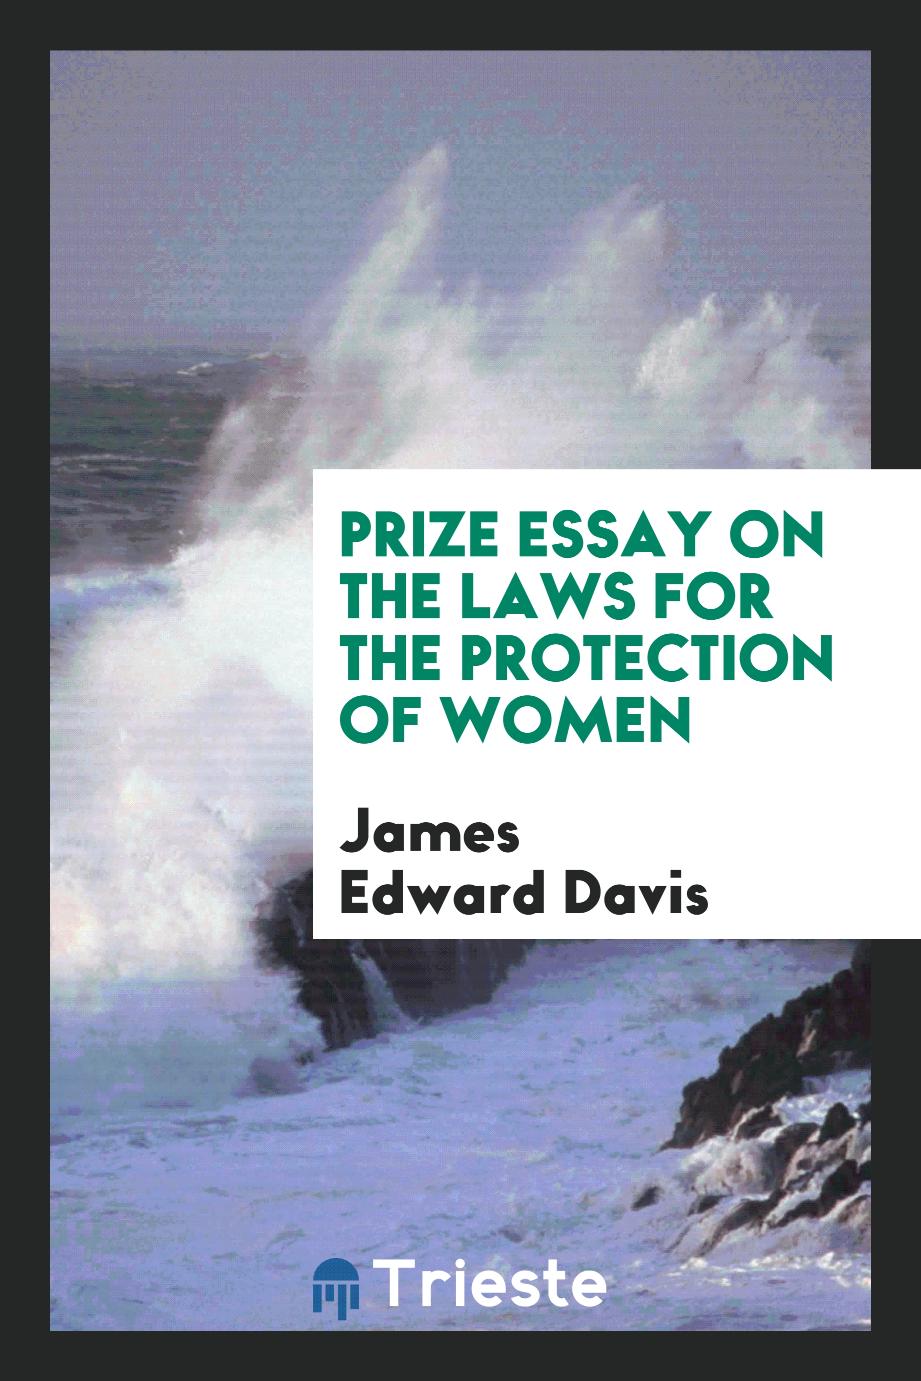 Prize Essay on the Laws for the Protection of Women